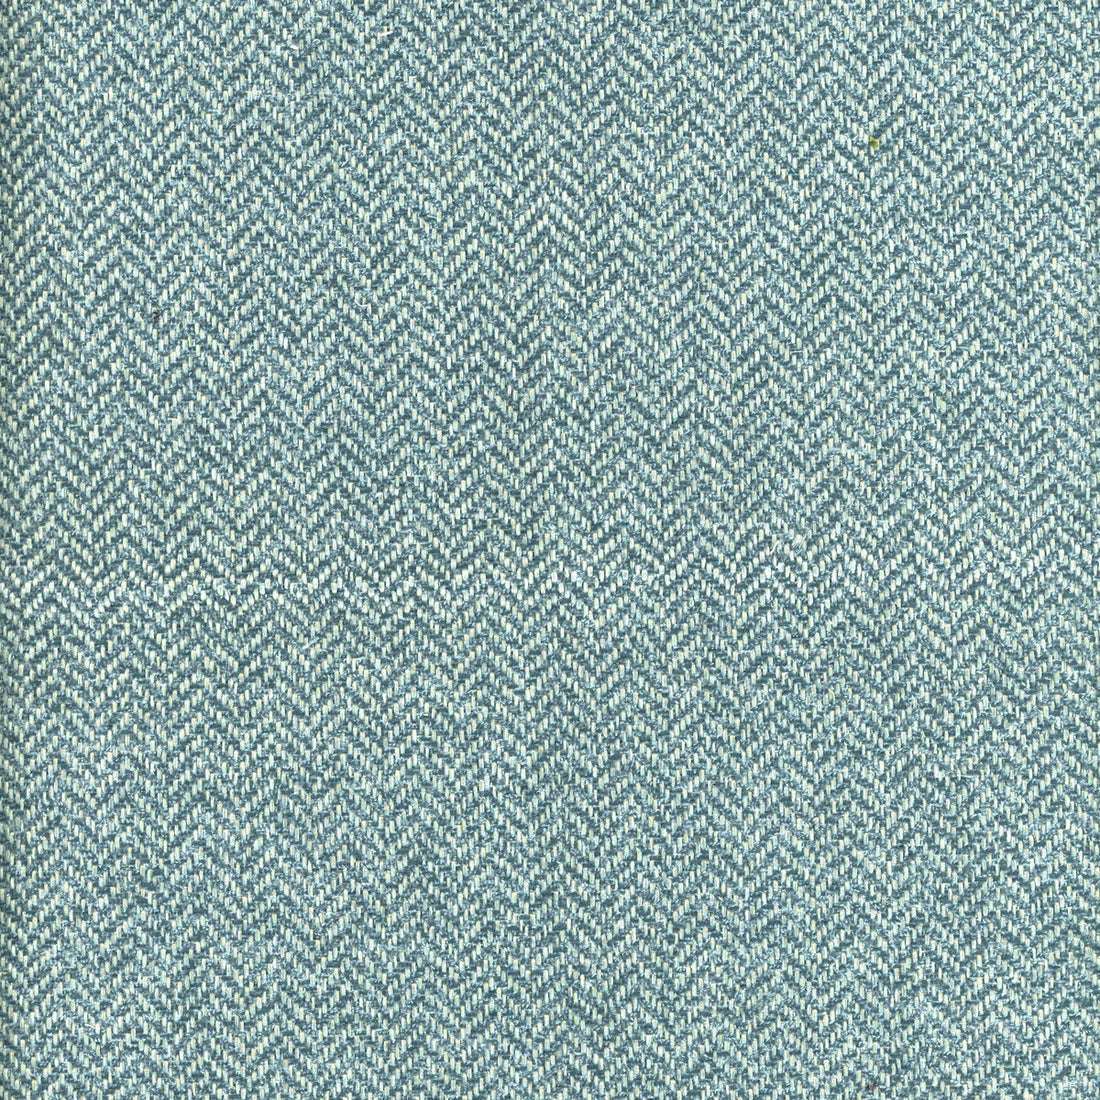 Nevada fabric in spring color - pattern AM100329.13.0 - by Kravet Couture in the Andrew Martin Canyon collection